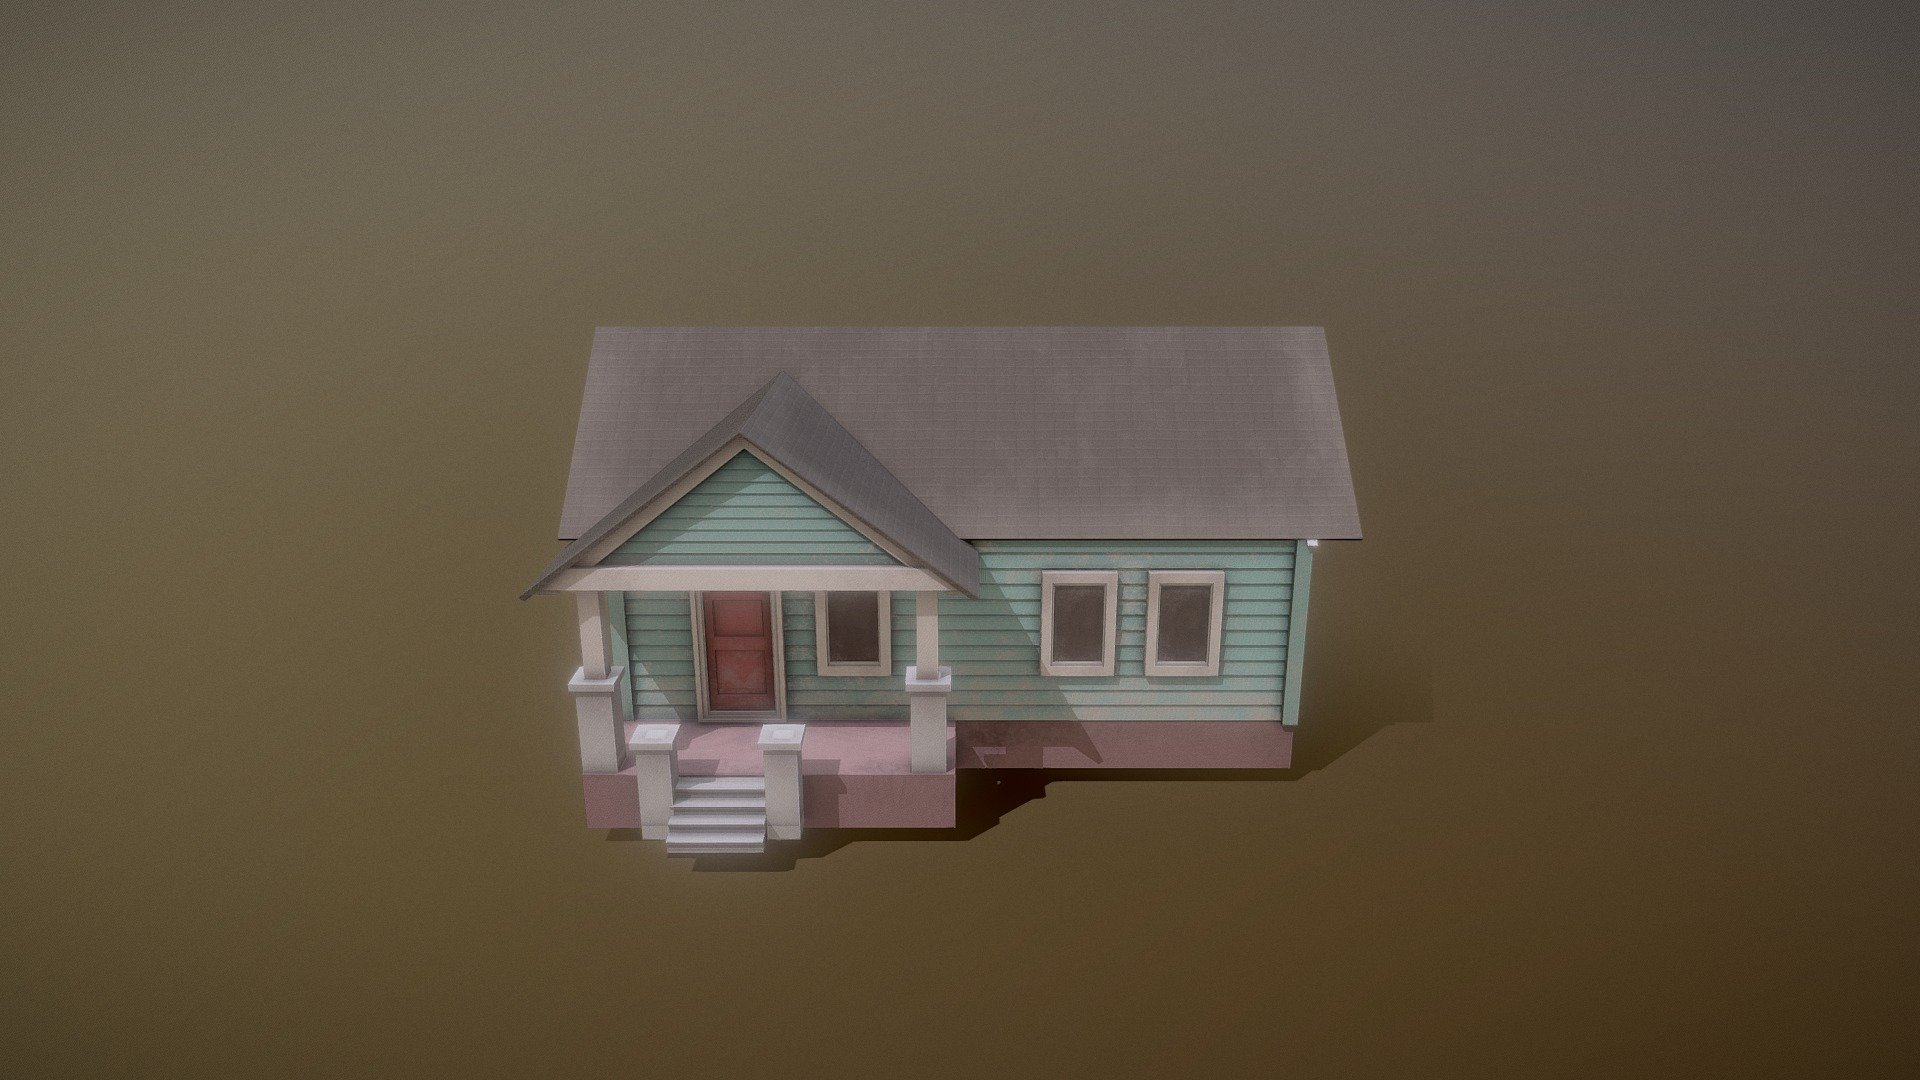 One of the houses I made for a Unity game 3d model